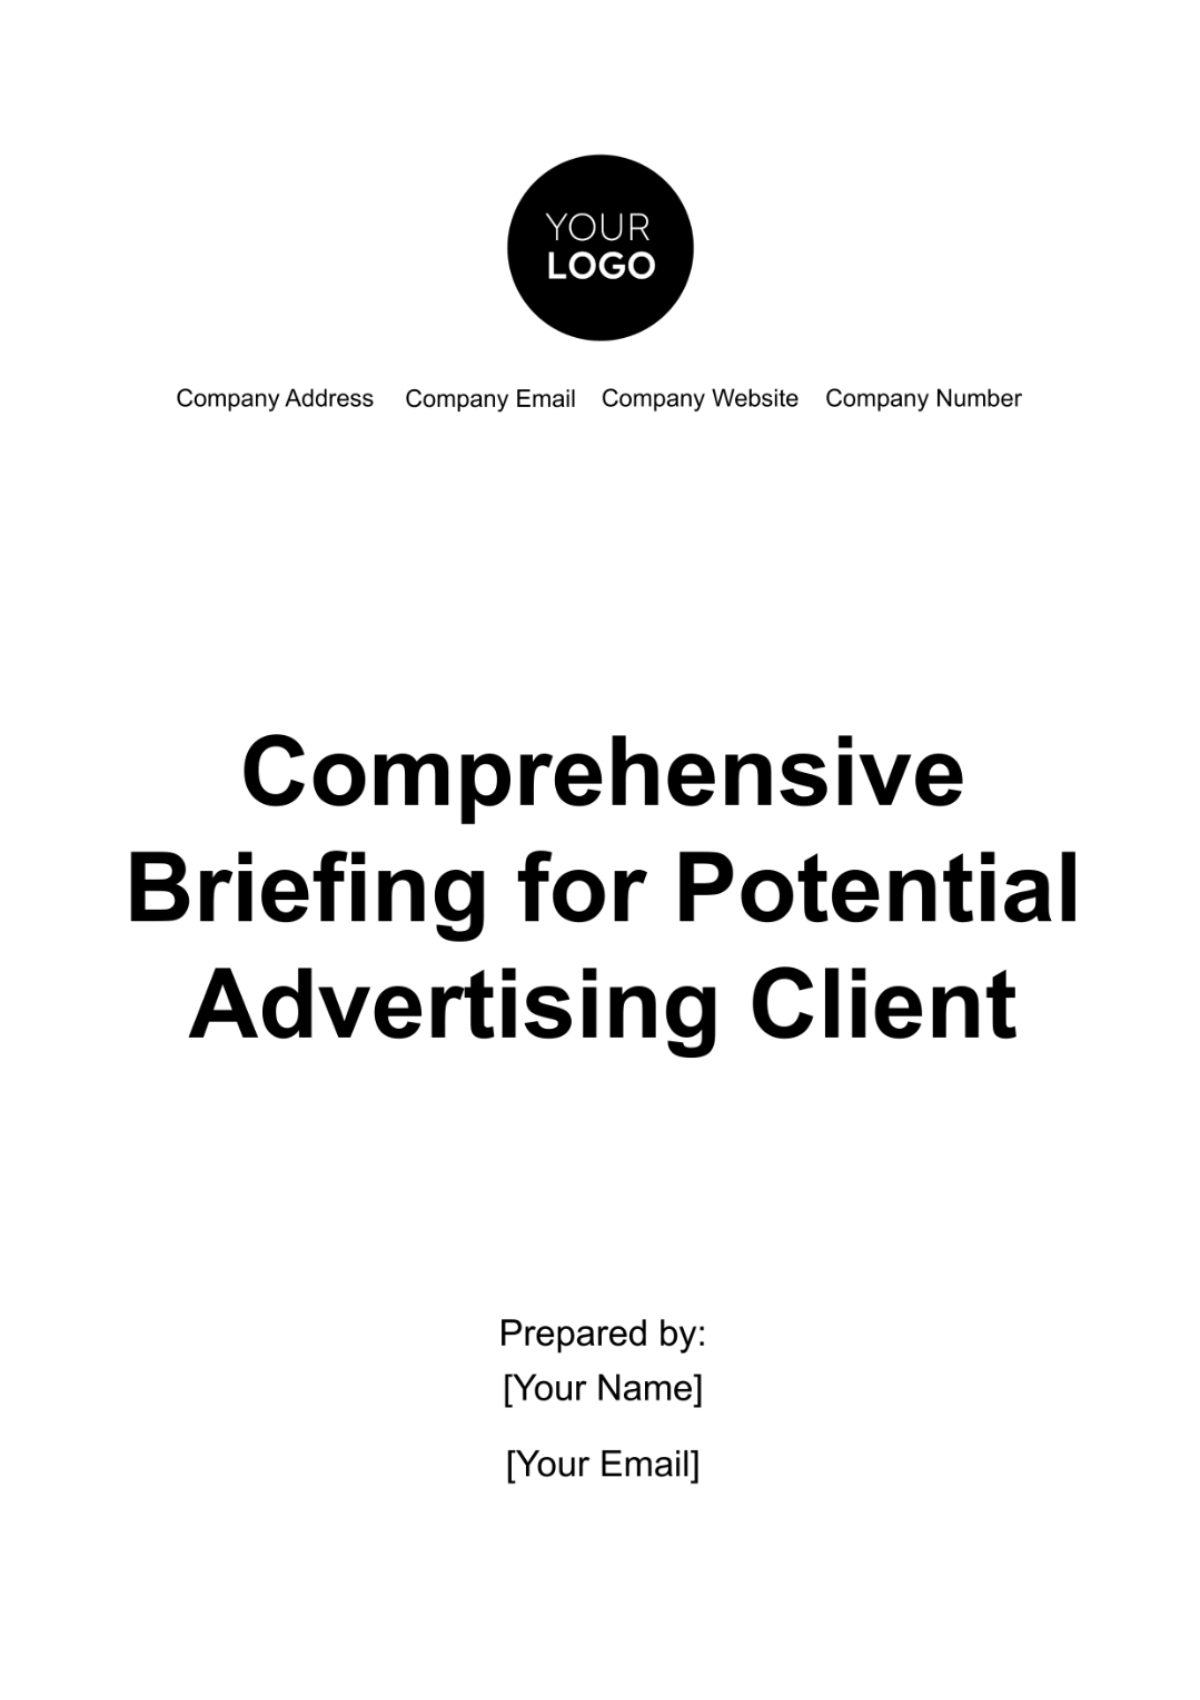 Free Comprehensive Briefing for Potential Advertising Client Template